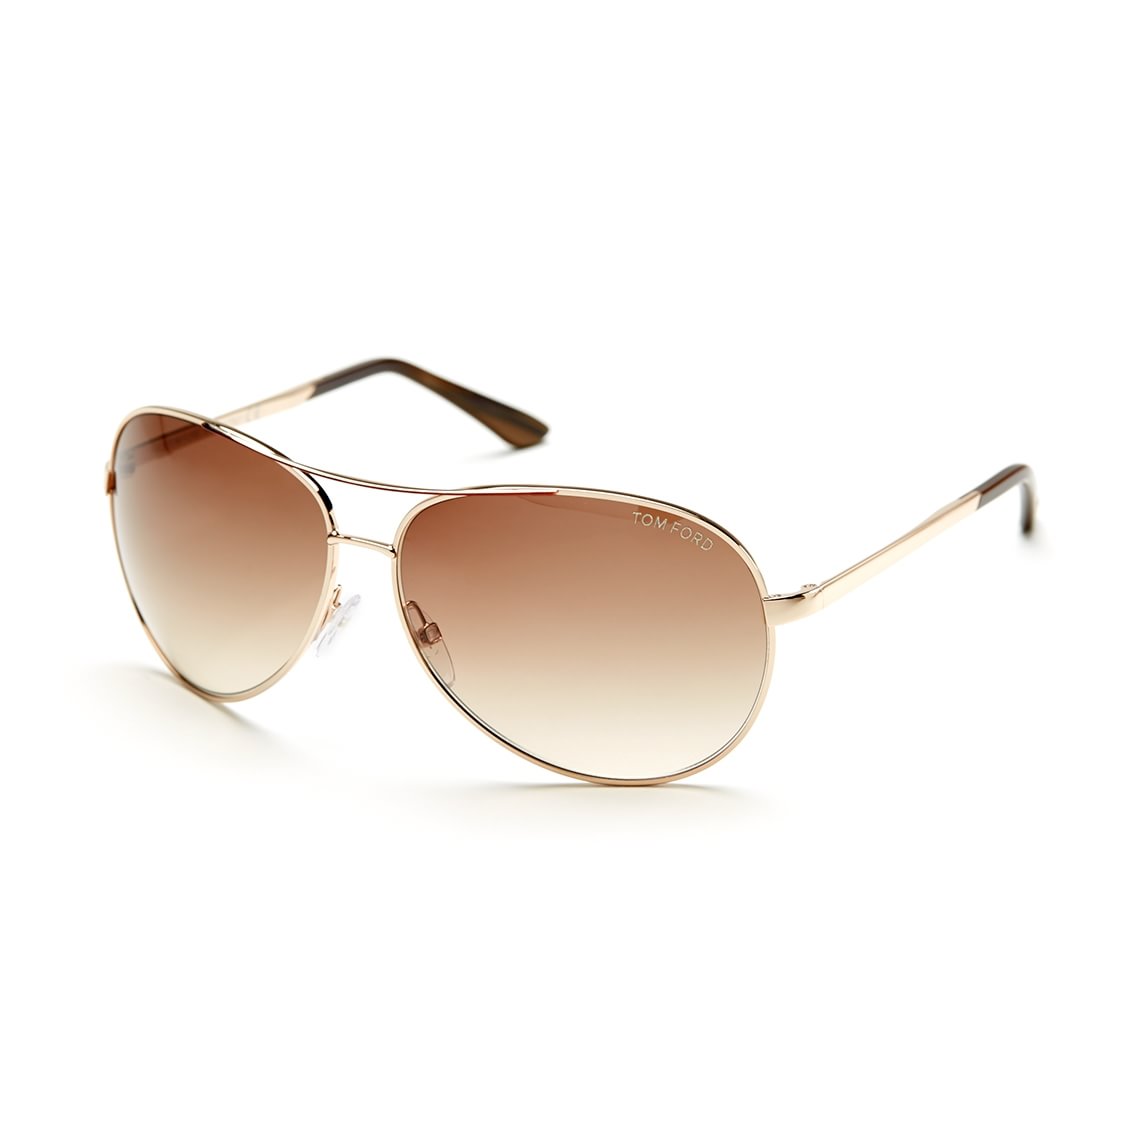 Tom ford aiden 772